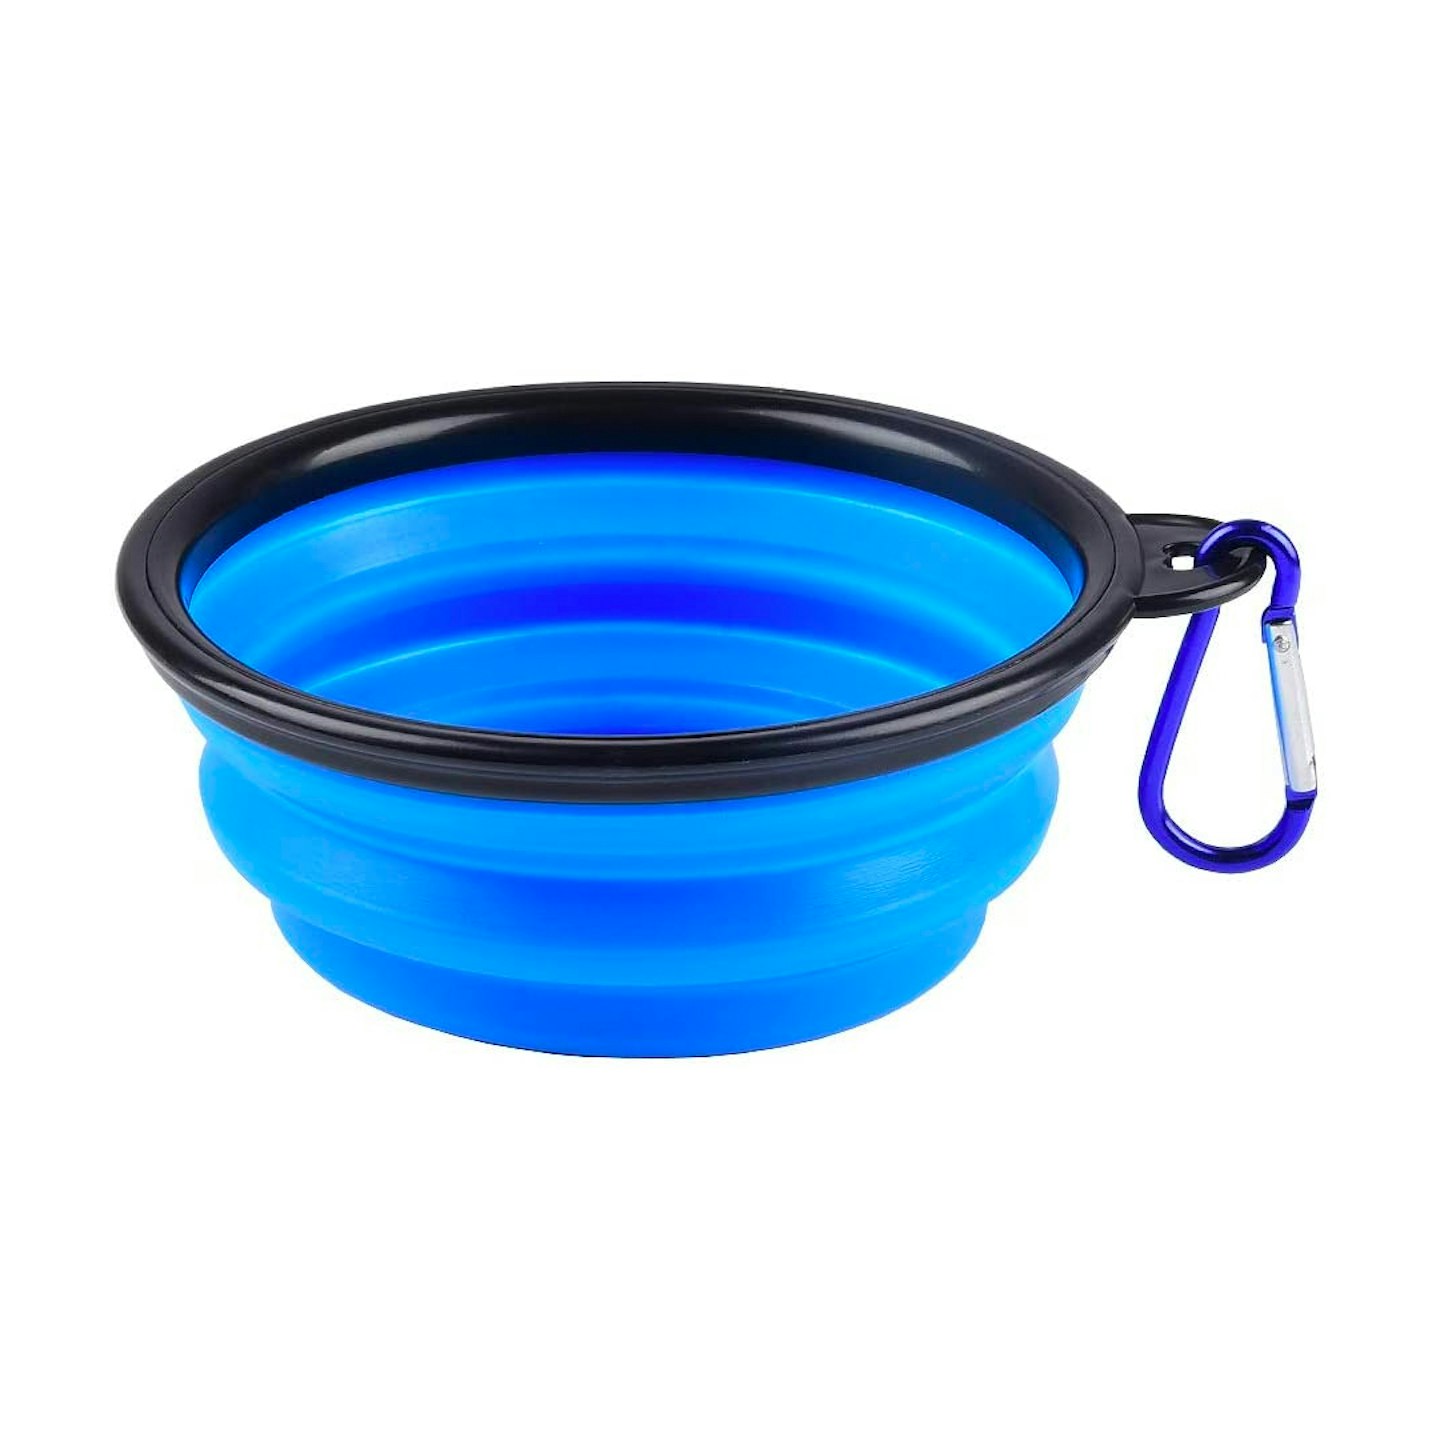 ZUOFENG Collapsible Travel Silicone Dog Bowl